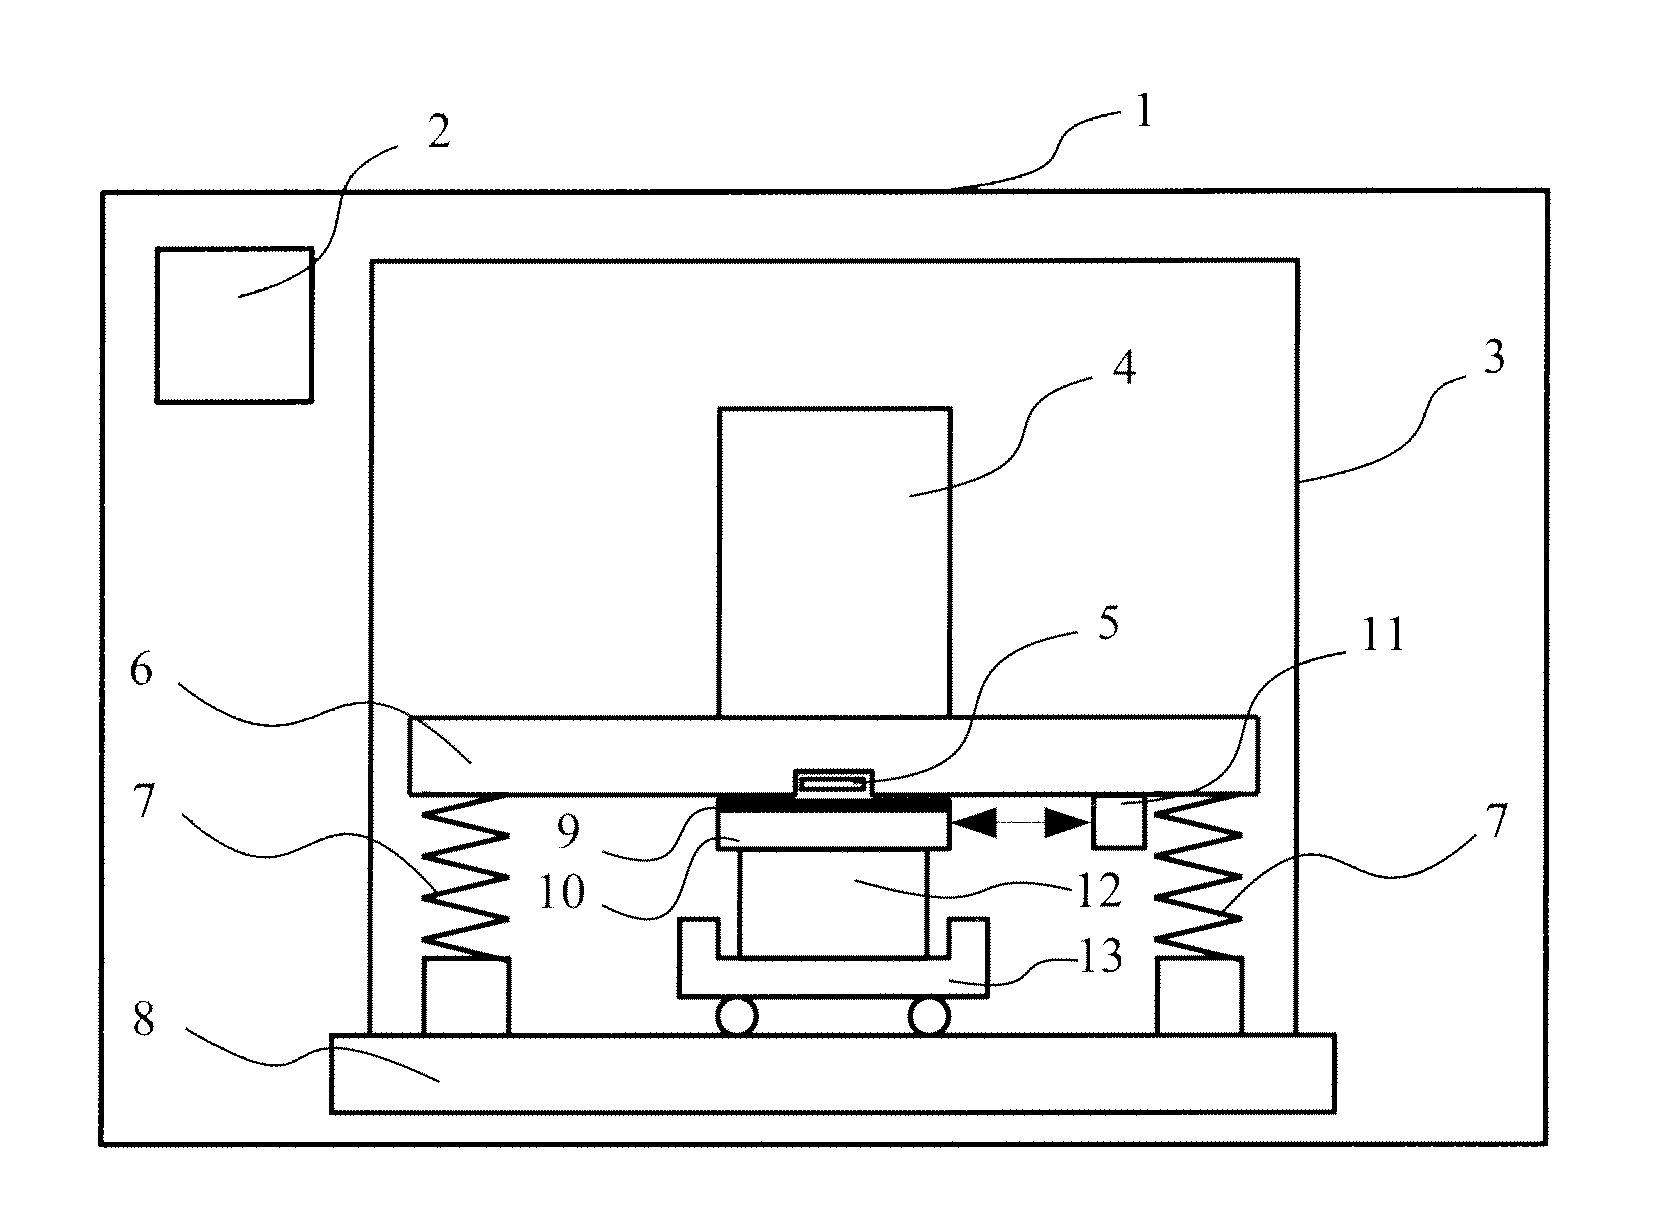 Lithography system with lens rotation